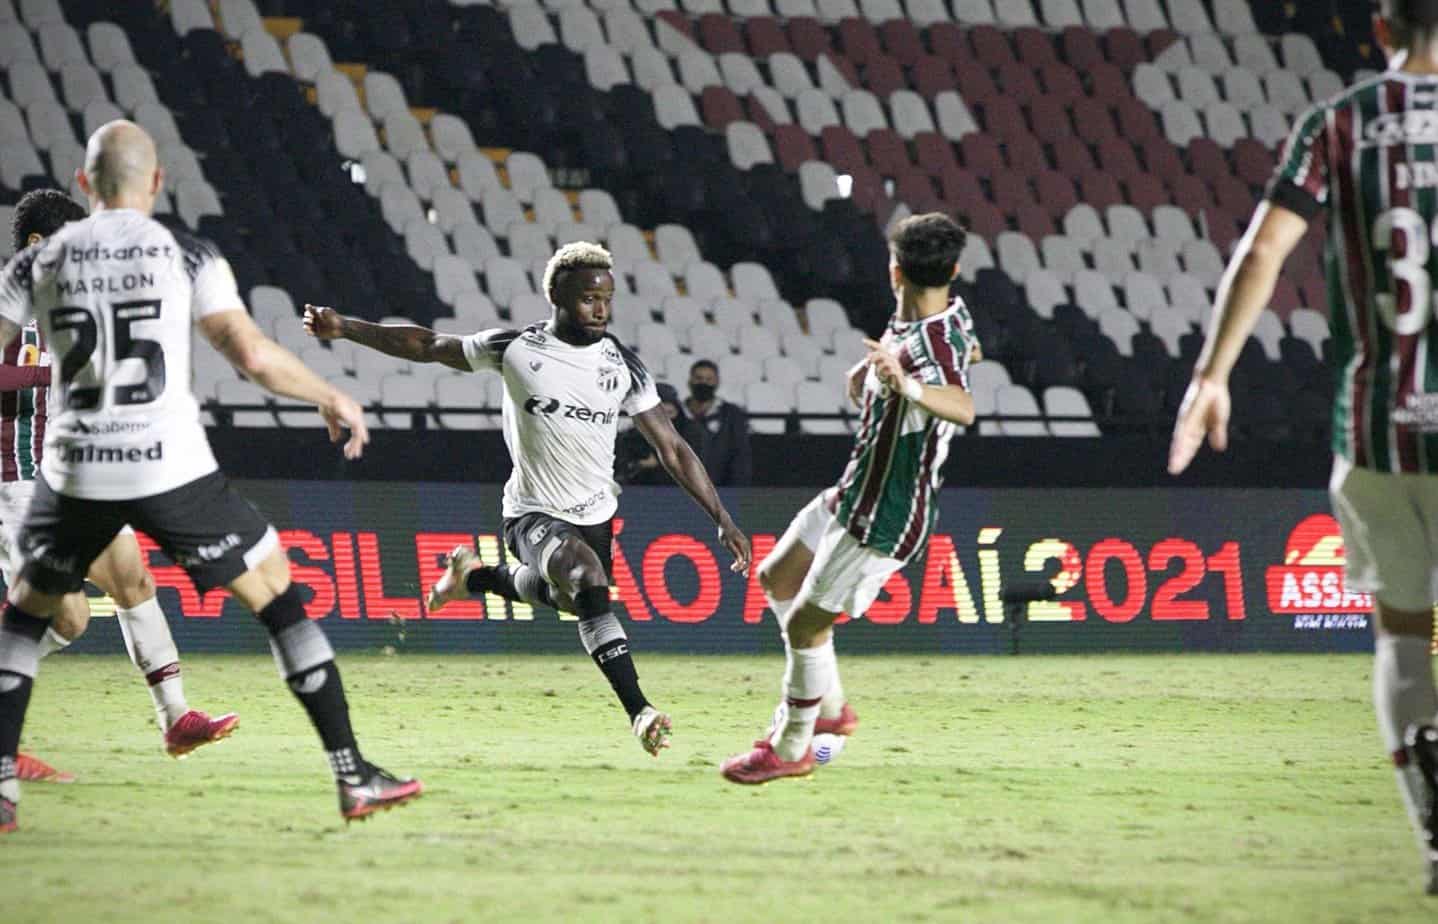 Soccer players from Brazil's Ceara and Fluminense during a recent match